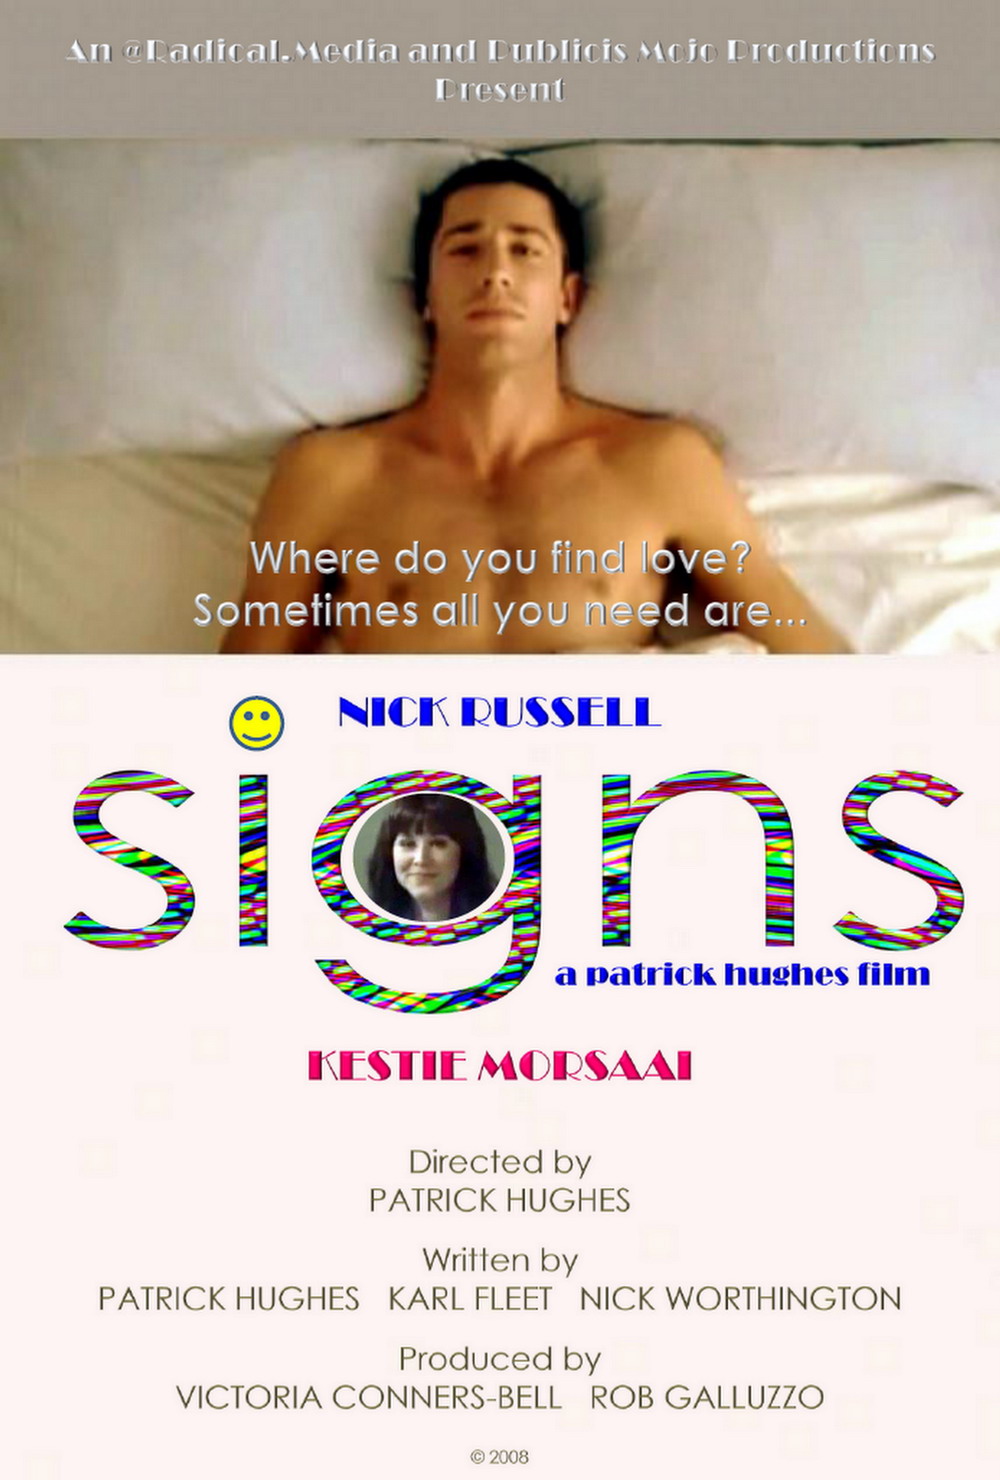 Signs (2008)